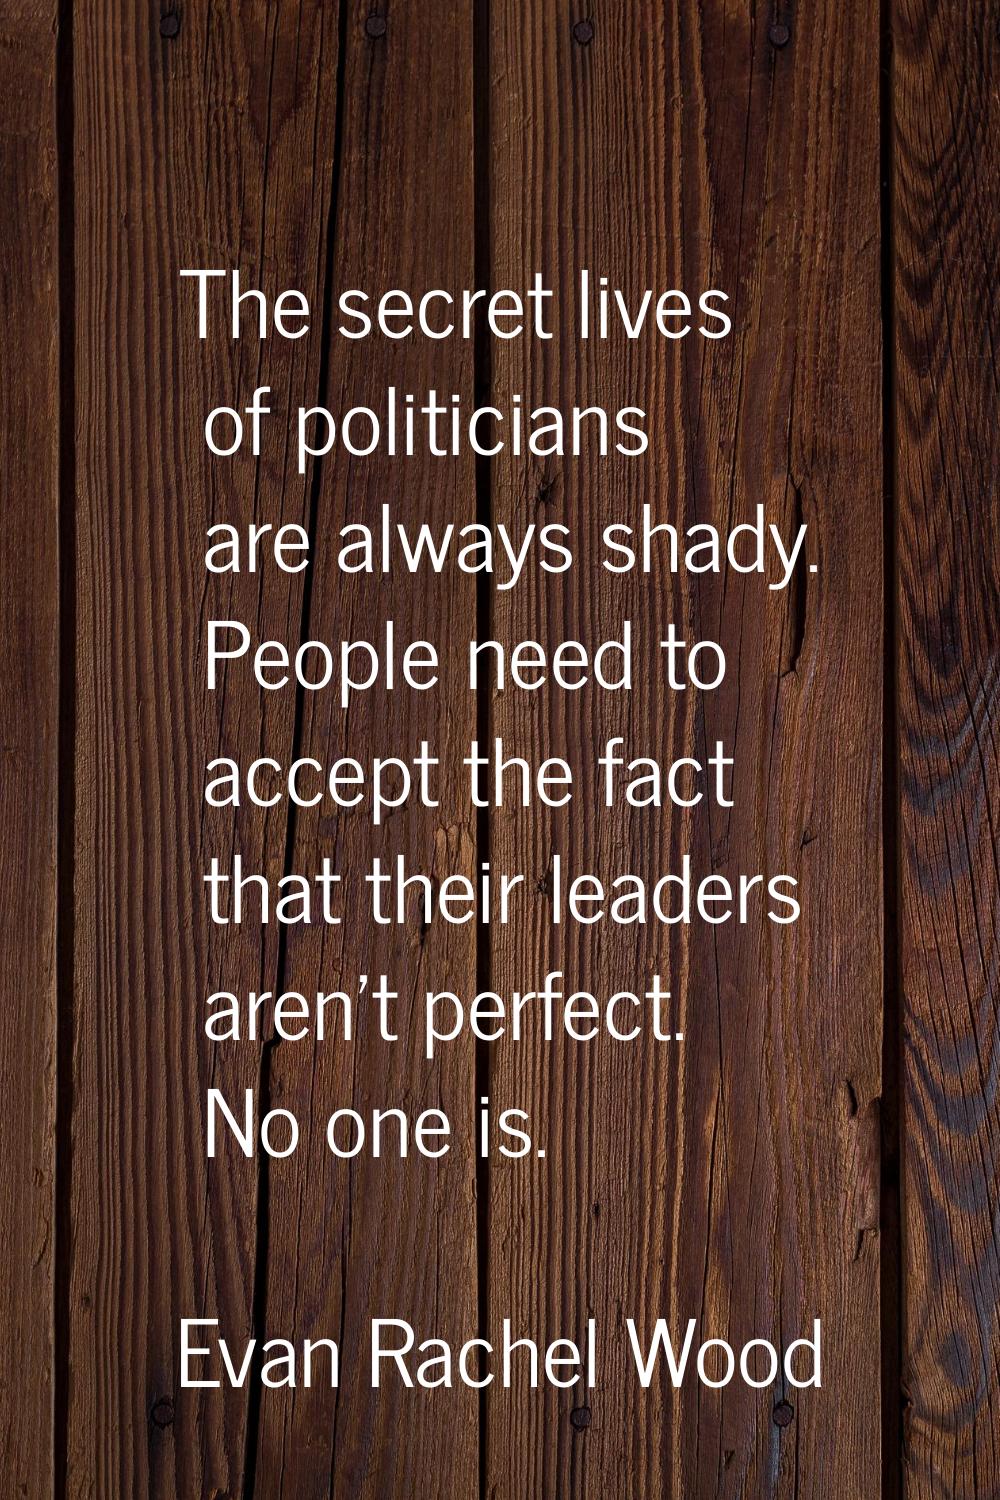 The secret lives of politicians are always shady. People need to accept the fact that their leaders